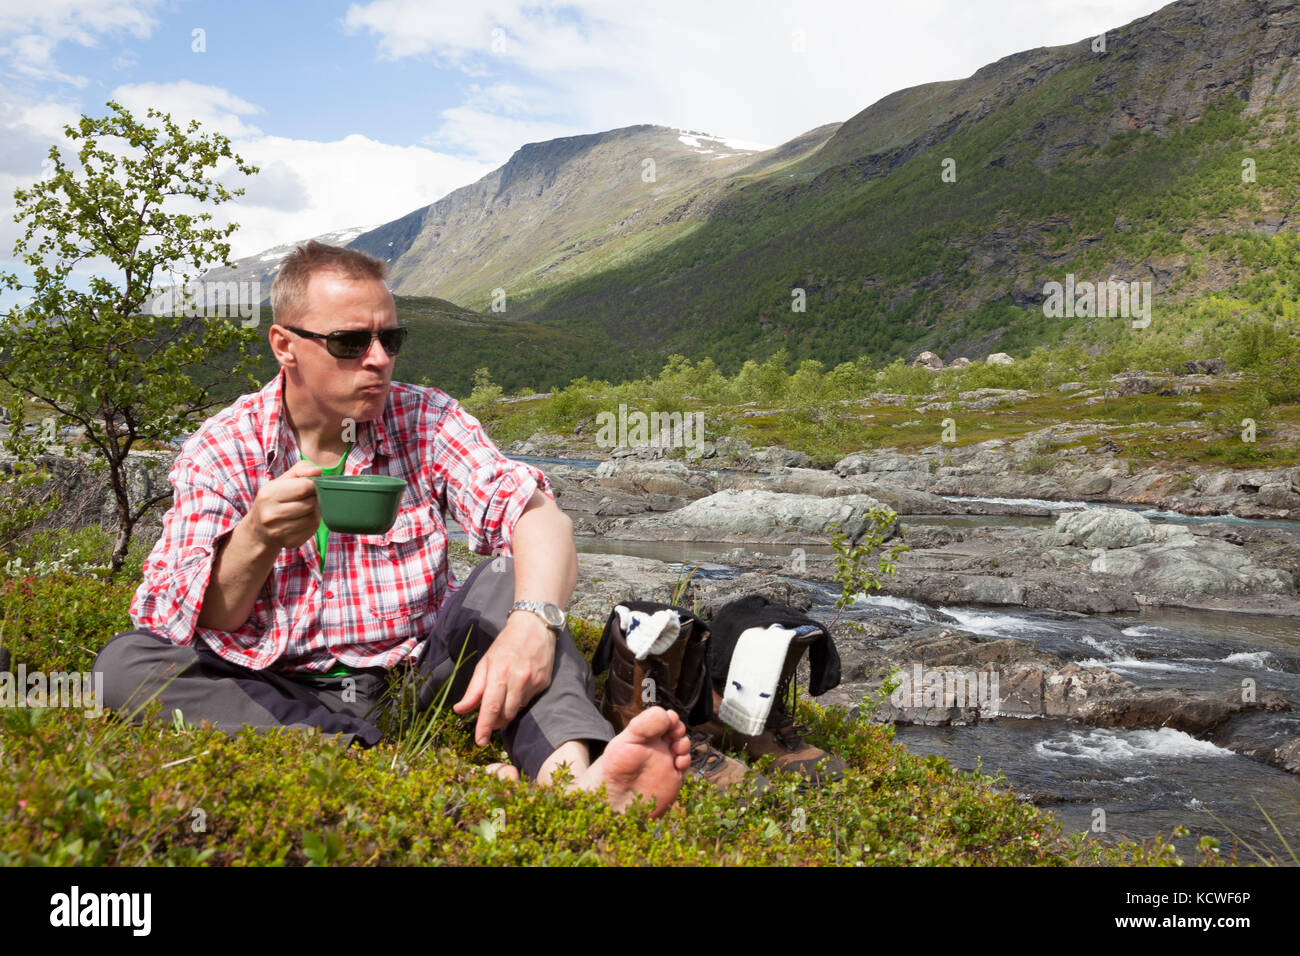 Hiker enjoys a cop of coffee in the mountains Stock Photo